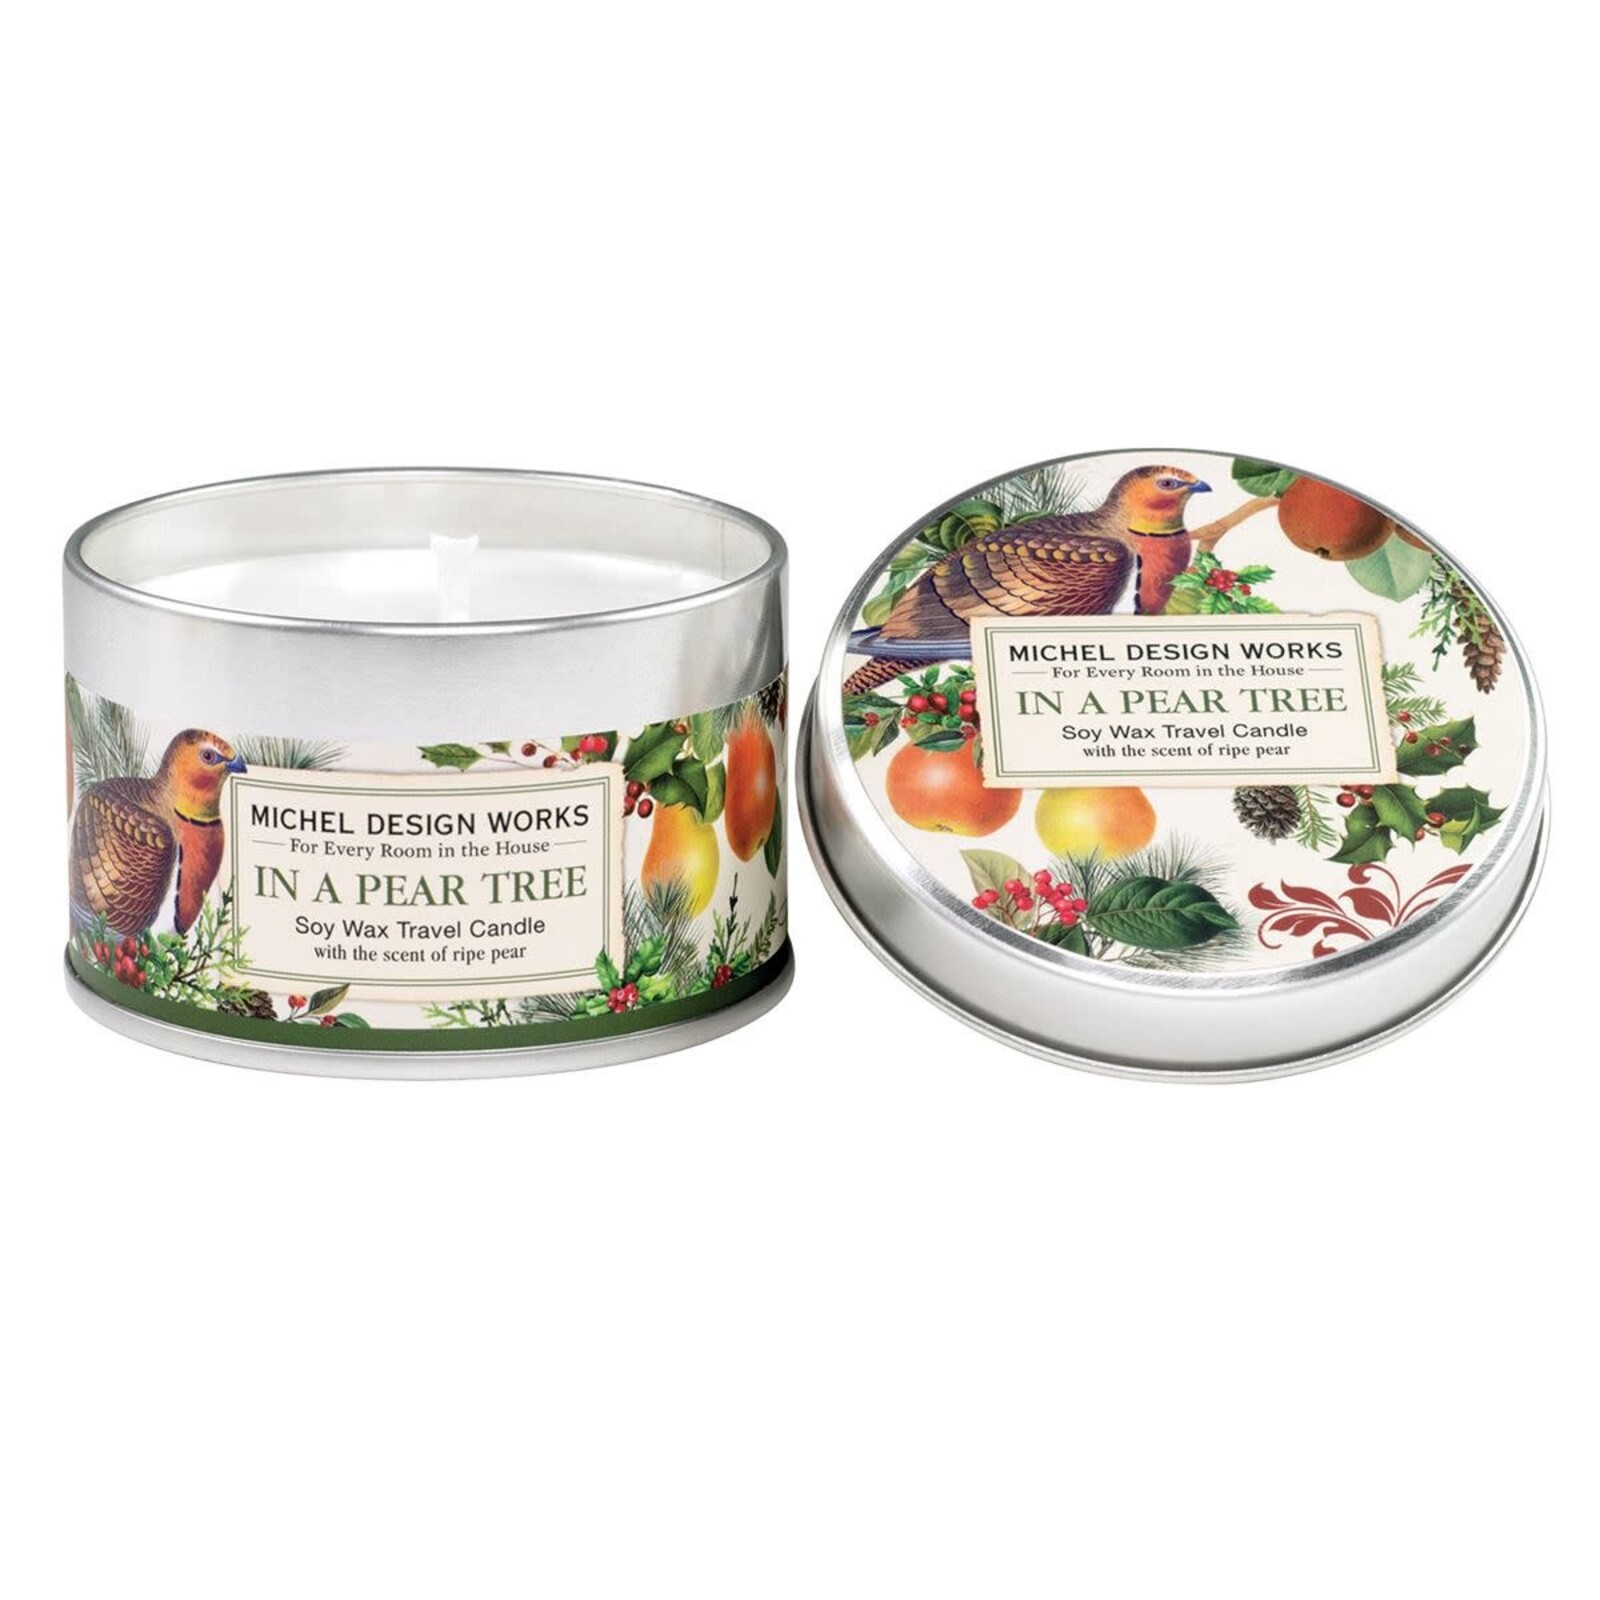 Michel Design Works In a Pear Tree Travel Candle   CANT345 loading=